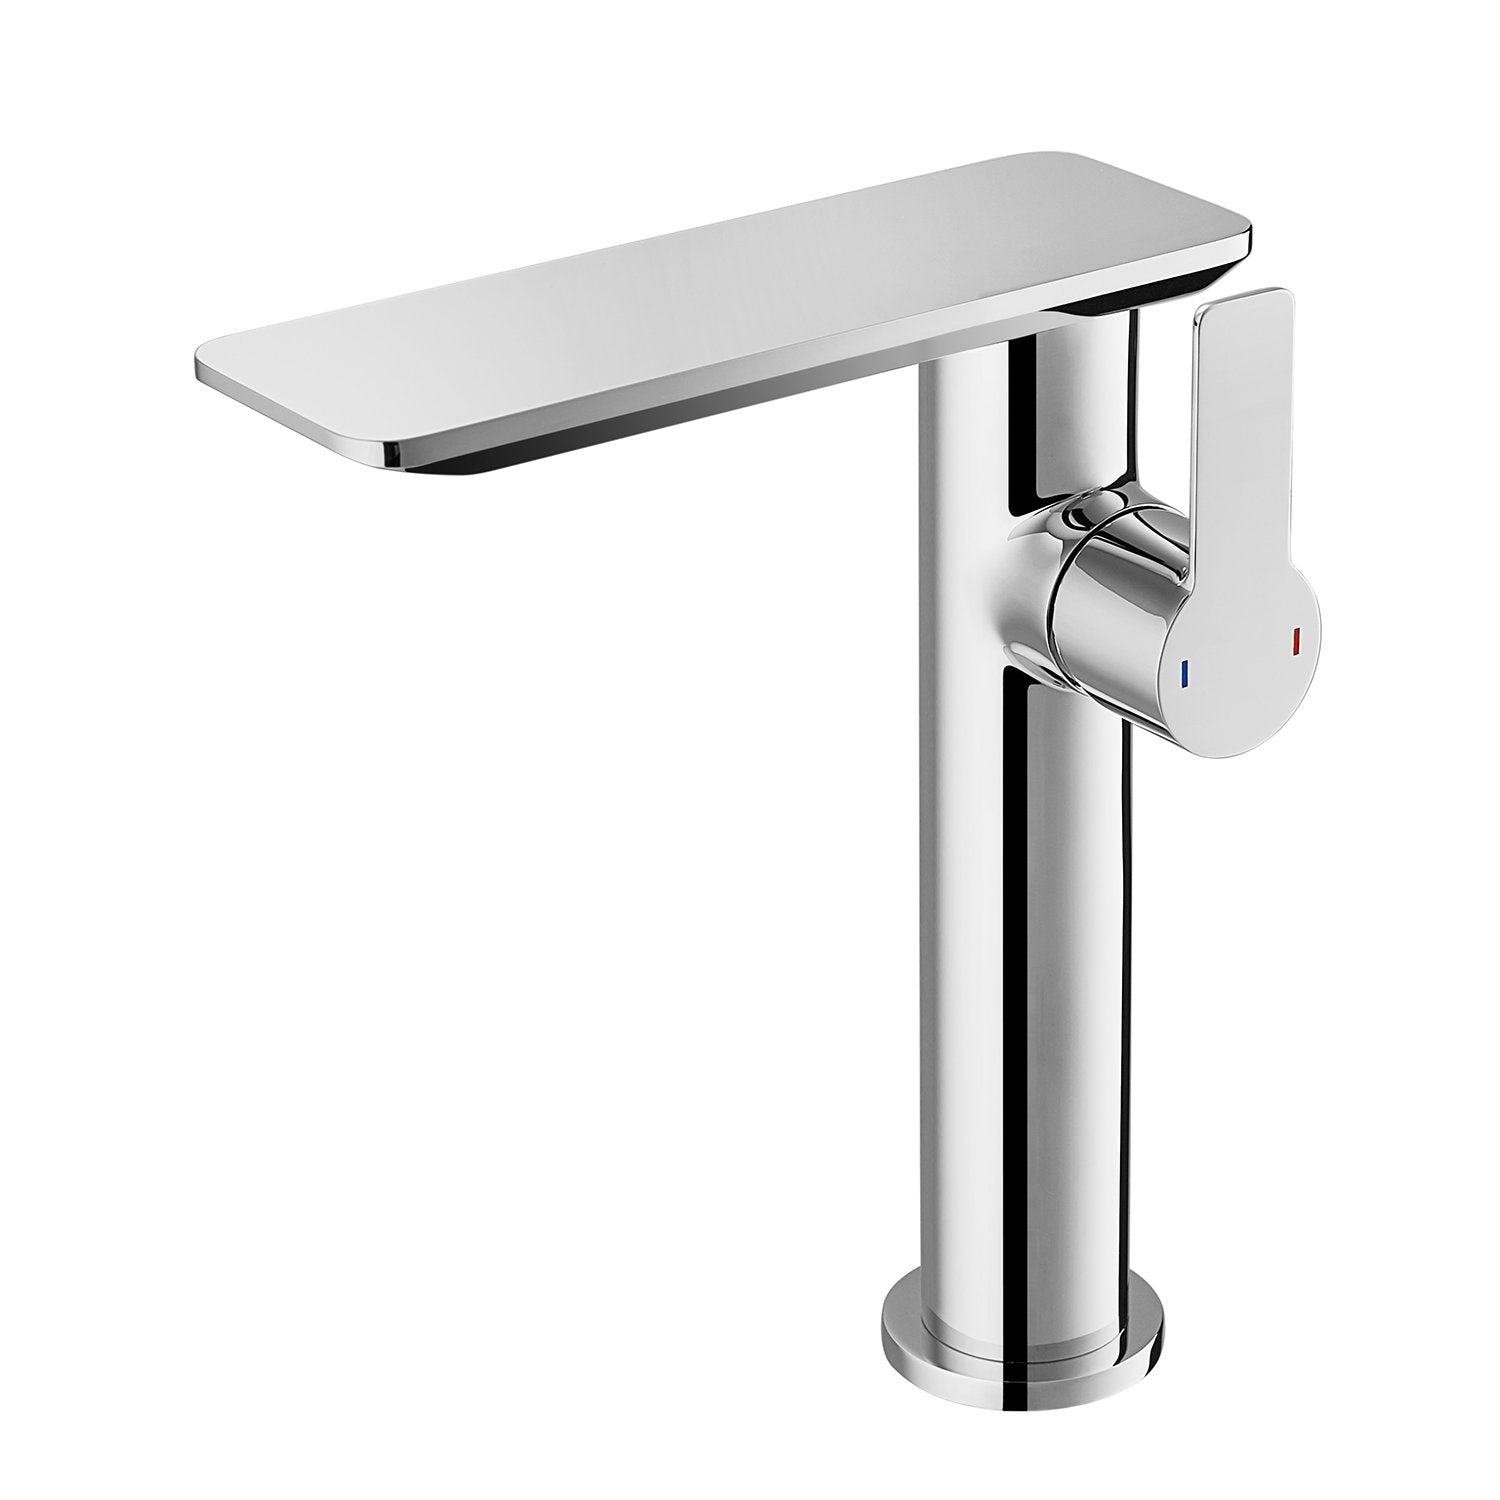 DAX Single Handle Bathroom Waterfall Vessel Sink Faucet, Deck Mount, Brass Body, Brushed Nickel Finish, Spout Height 8-1/16 Inches (DAX-8205A-BN)